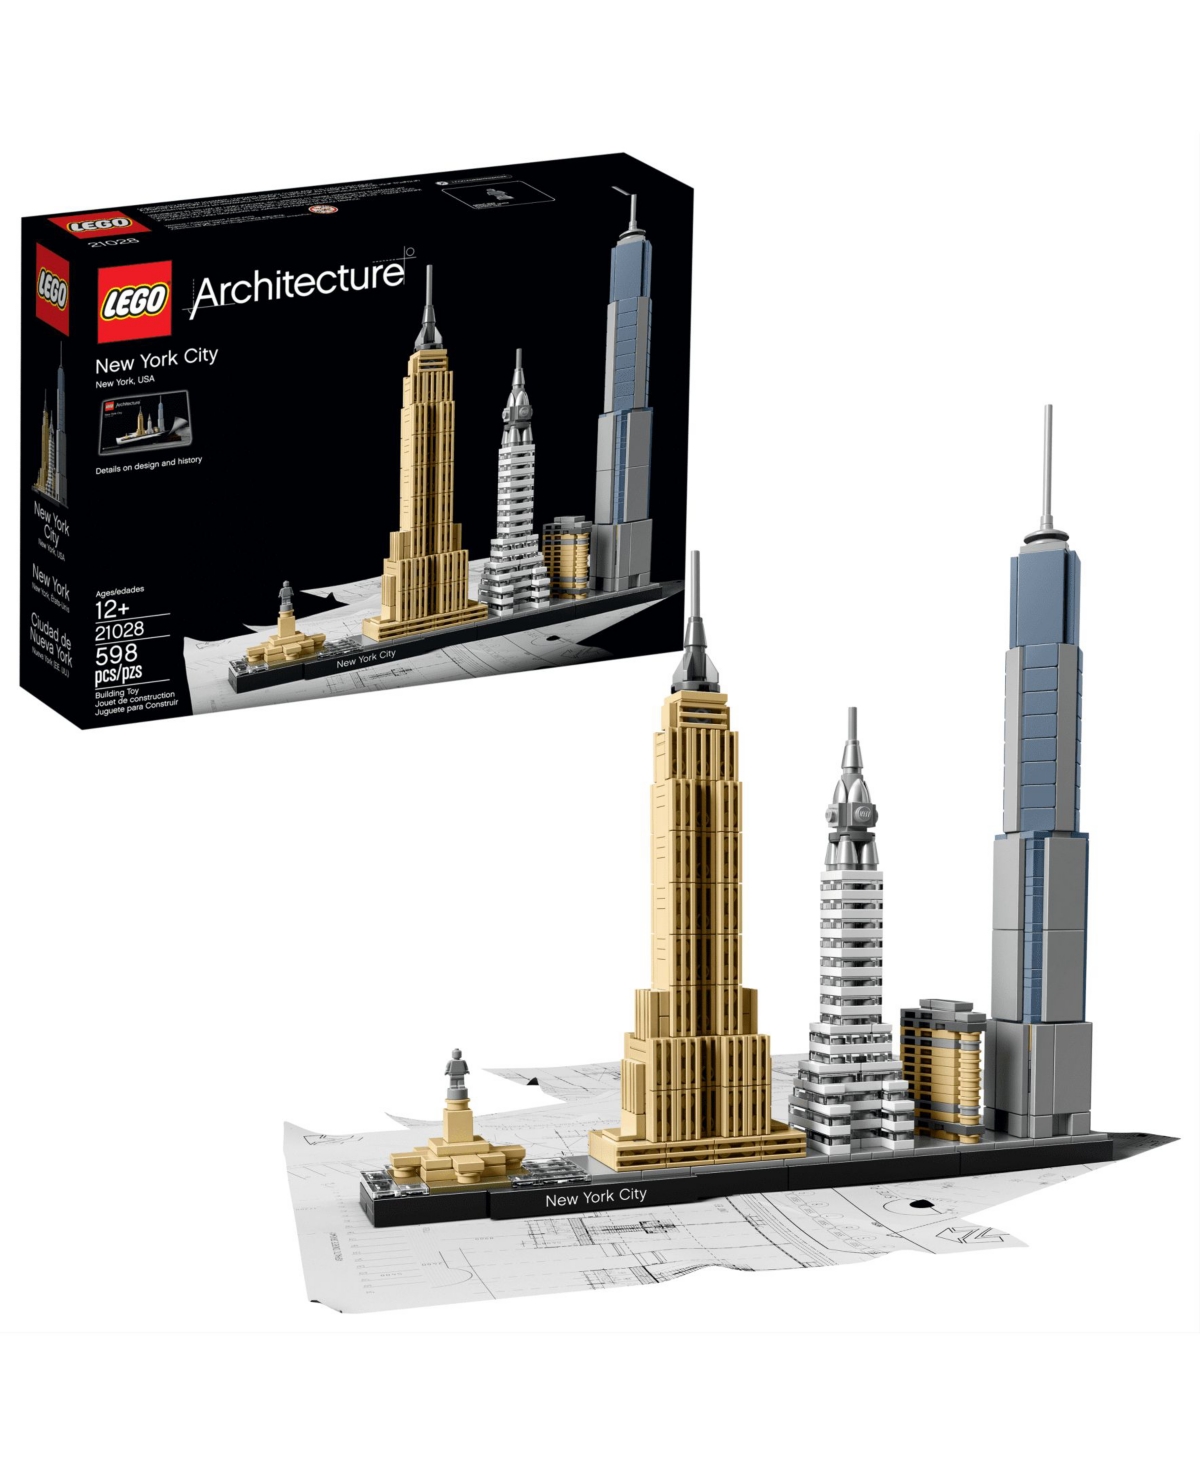 Lego Architecture 21028 New York City Toy Building Set In No Color